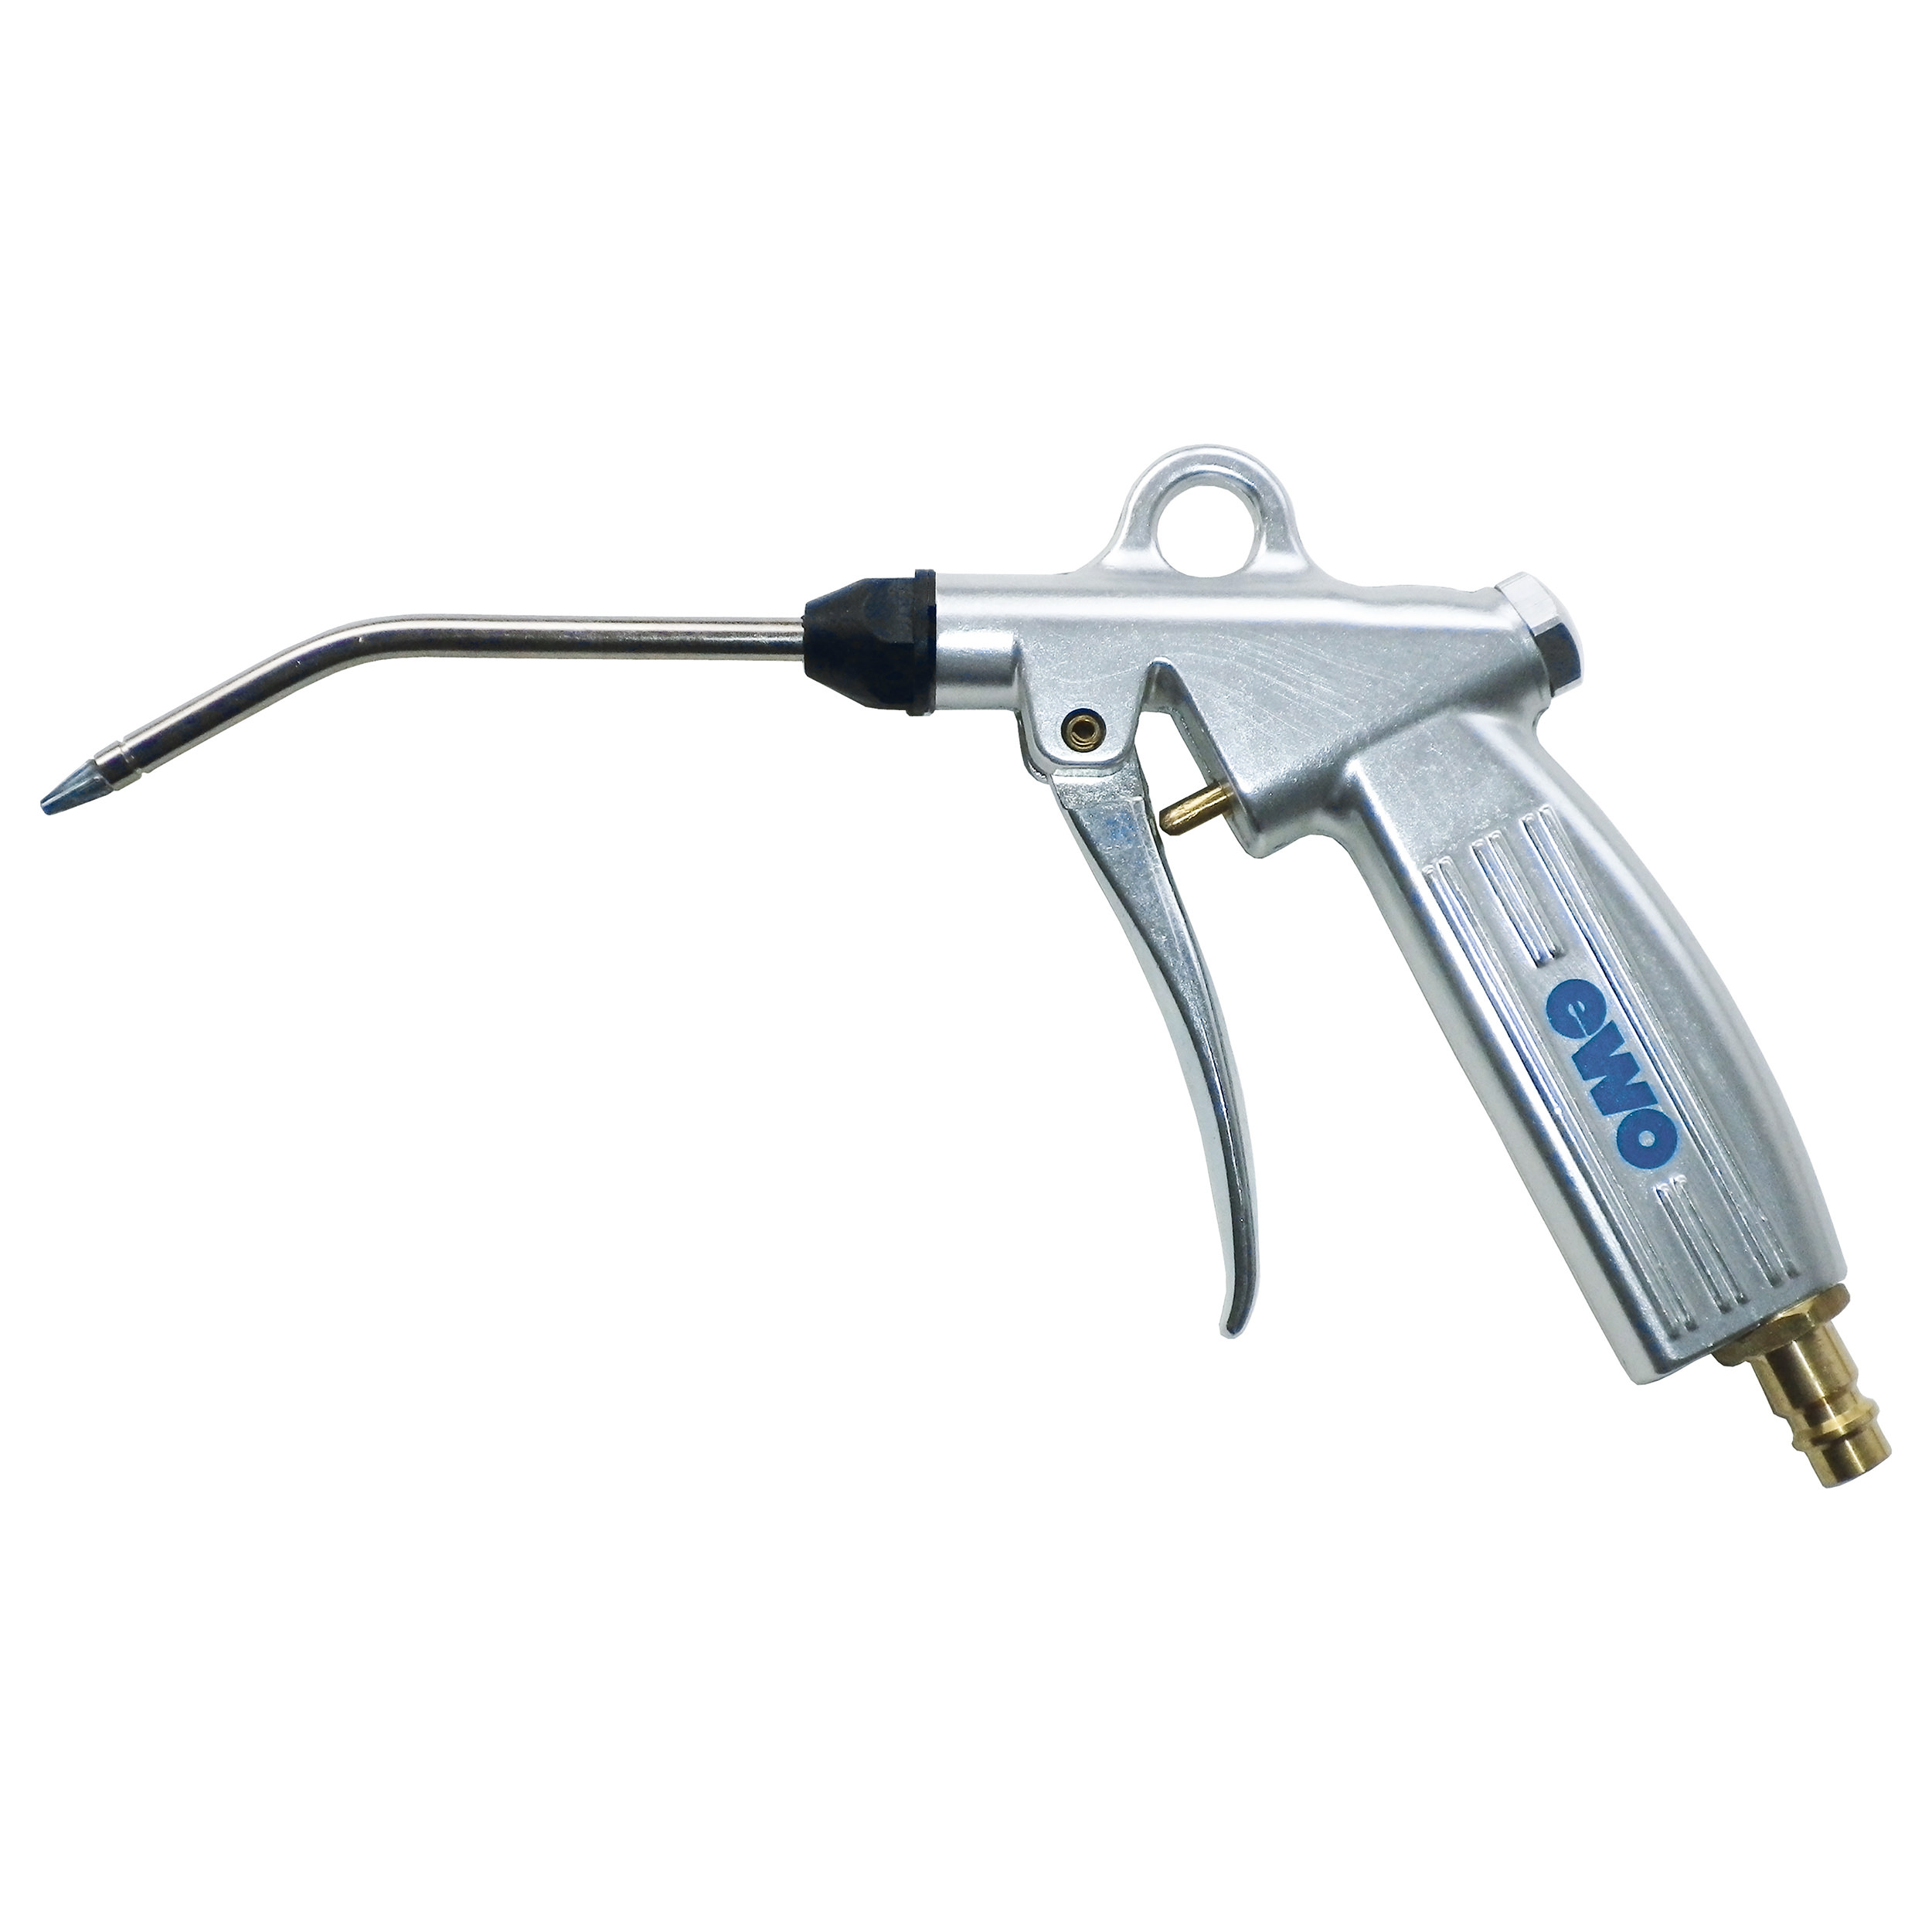 Blow gun, aluminium, forged, clear anodised, safety nozzle safetystar: length: 120 mm, star nozzle; G¼ female